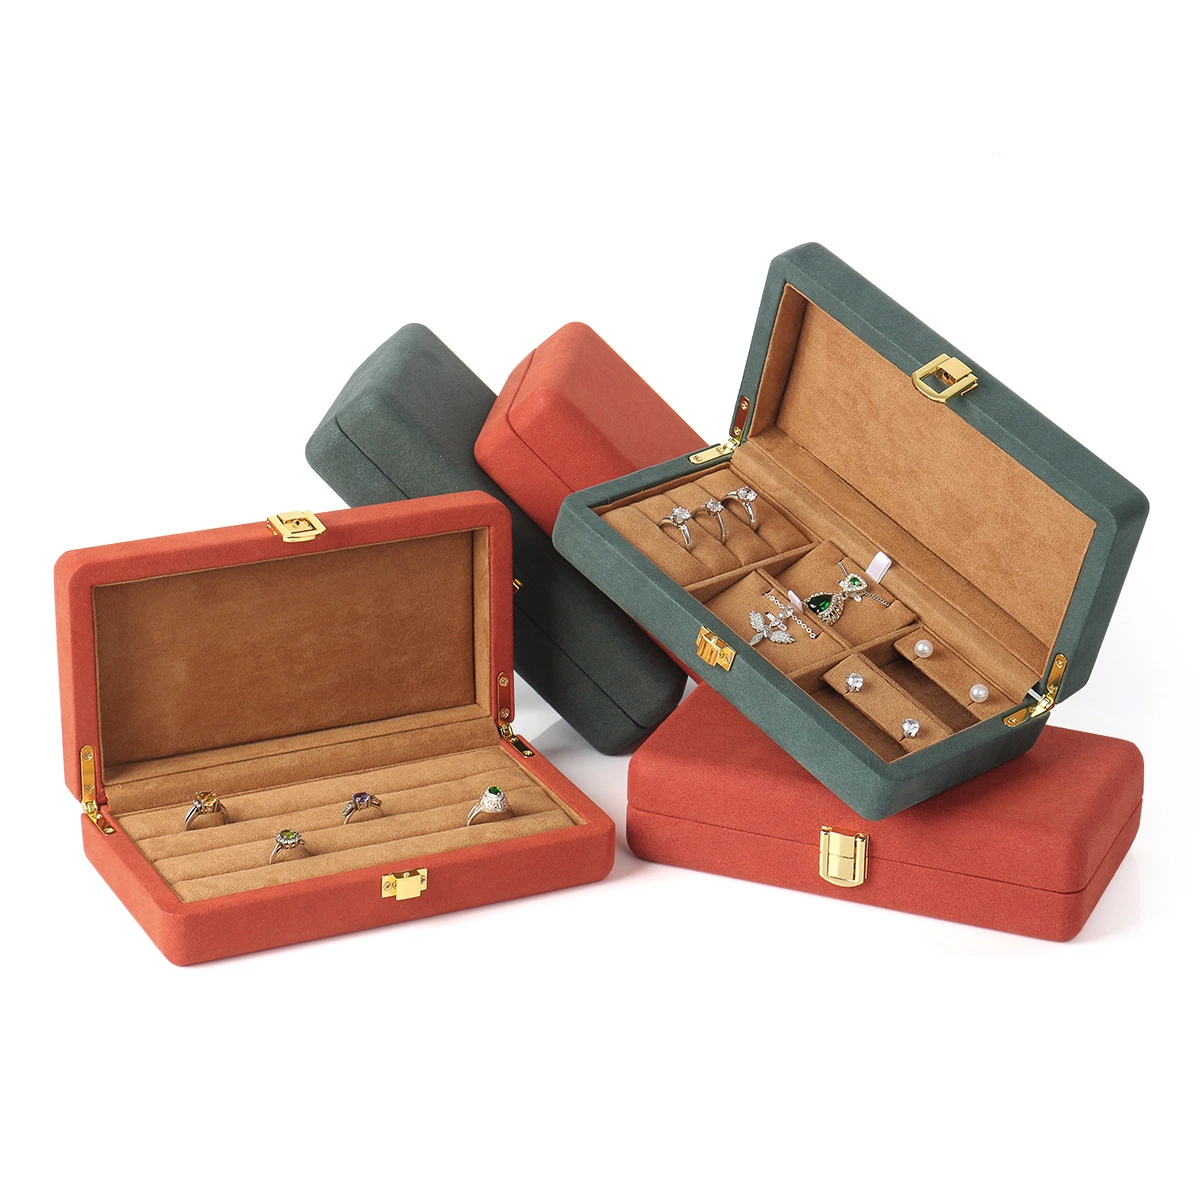 New Wooden Jewelry Set Display Box Ring Pendant Necklace Jewelry Packing Box Spot Jewelry Box Storage Box Metal Buckle Microfiber Jewelry Box 2 Colors Selection